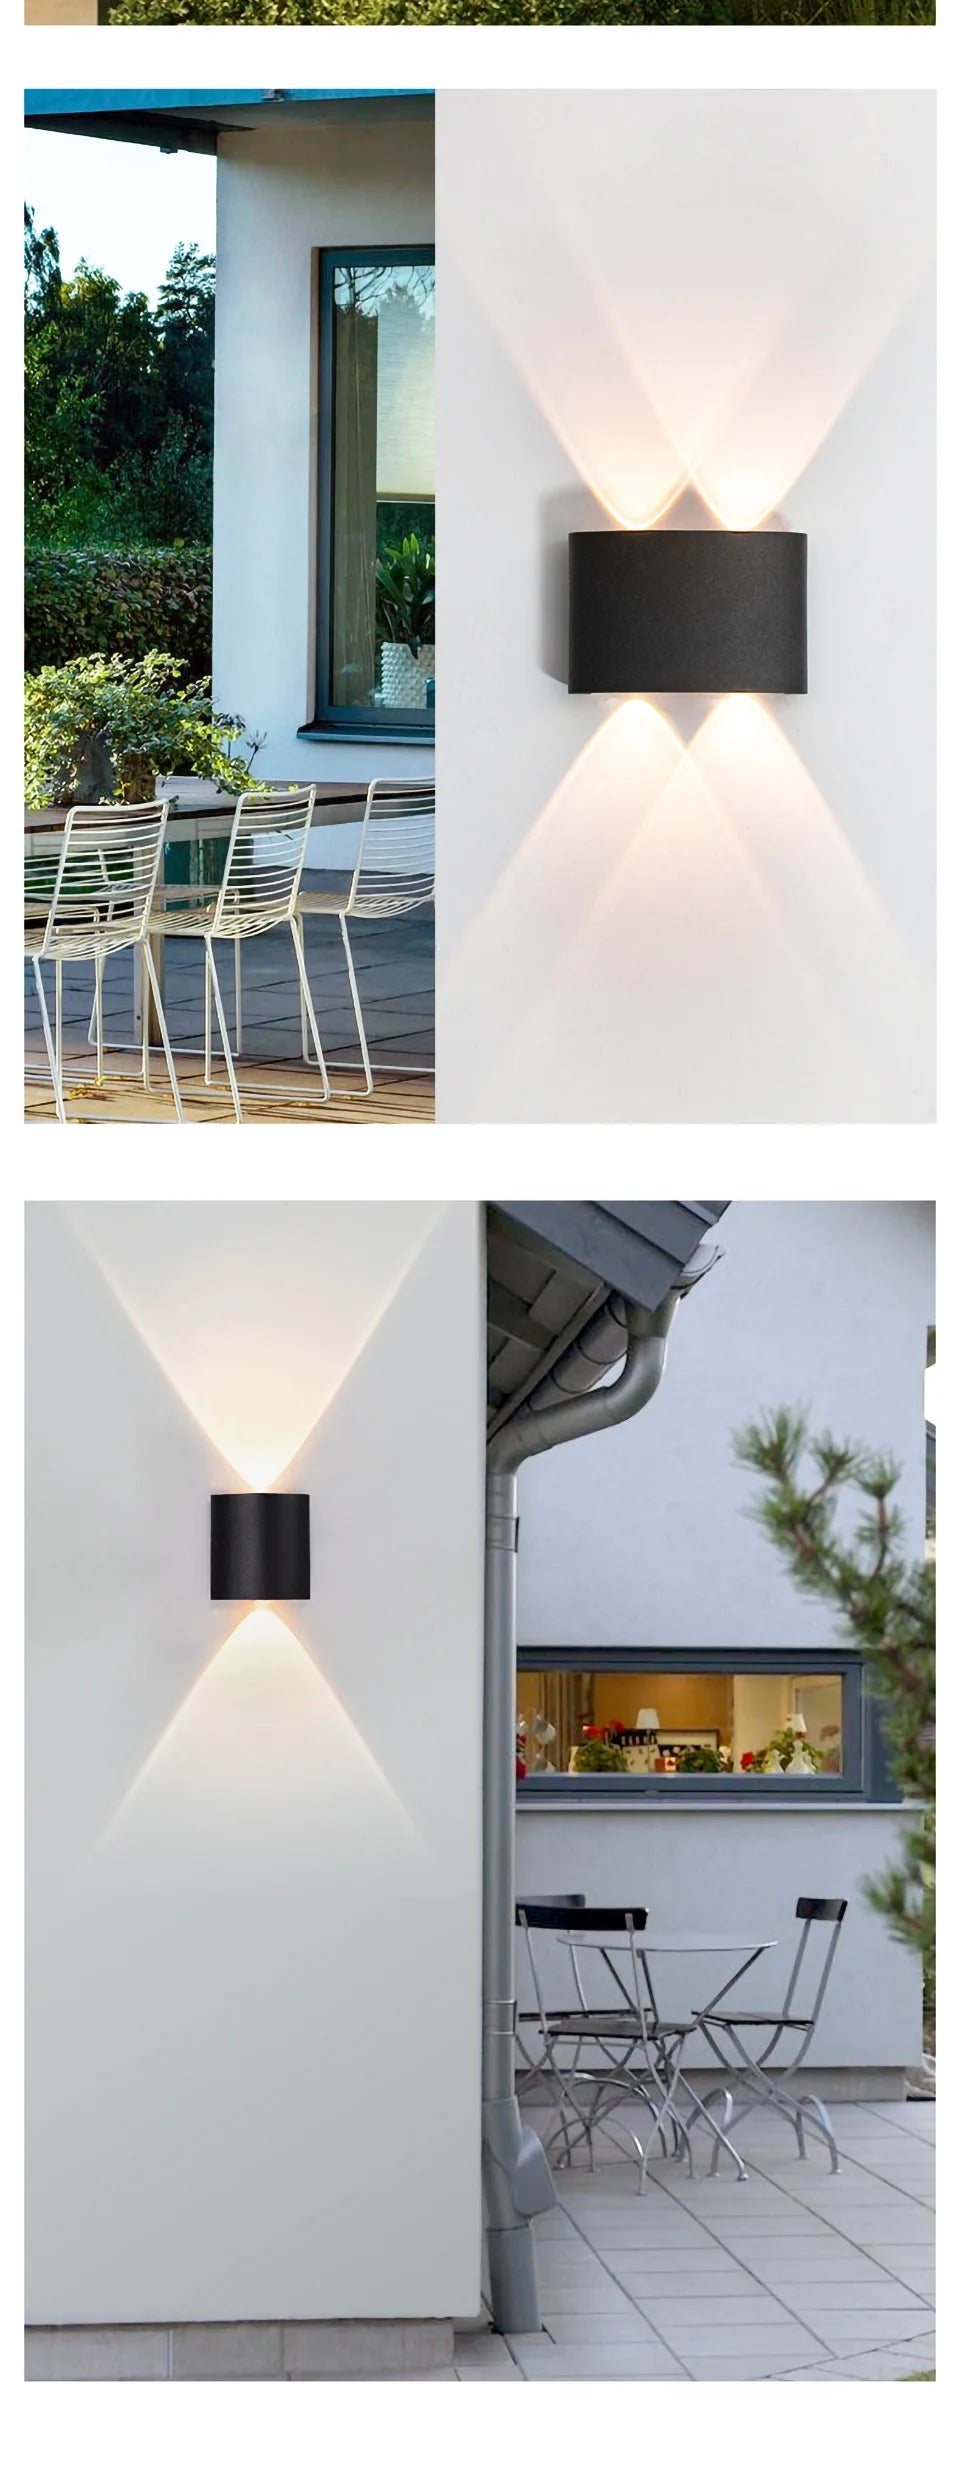 Contemporary wall lamp with LED light source and aluminum body.